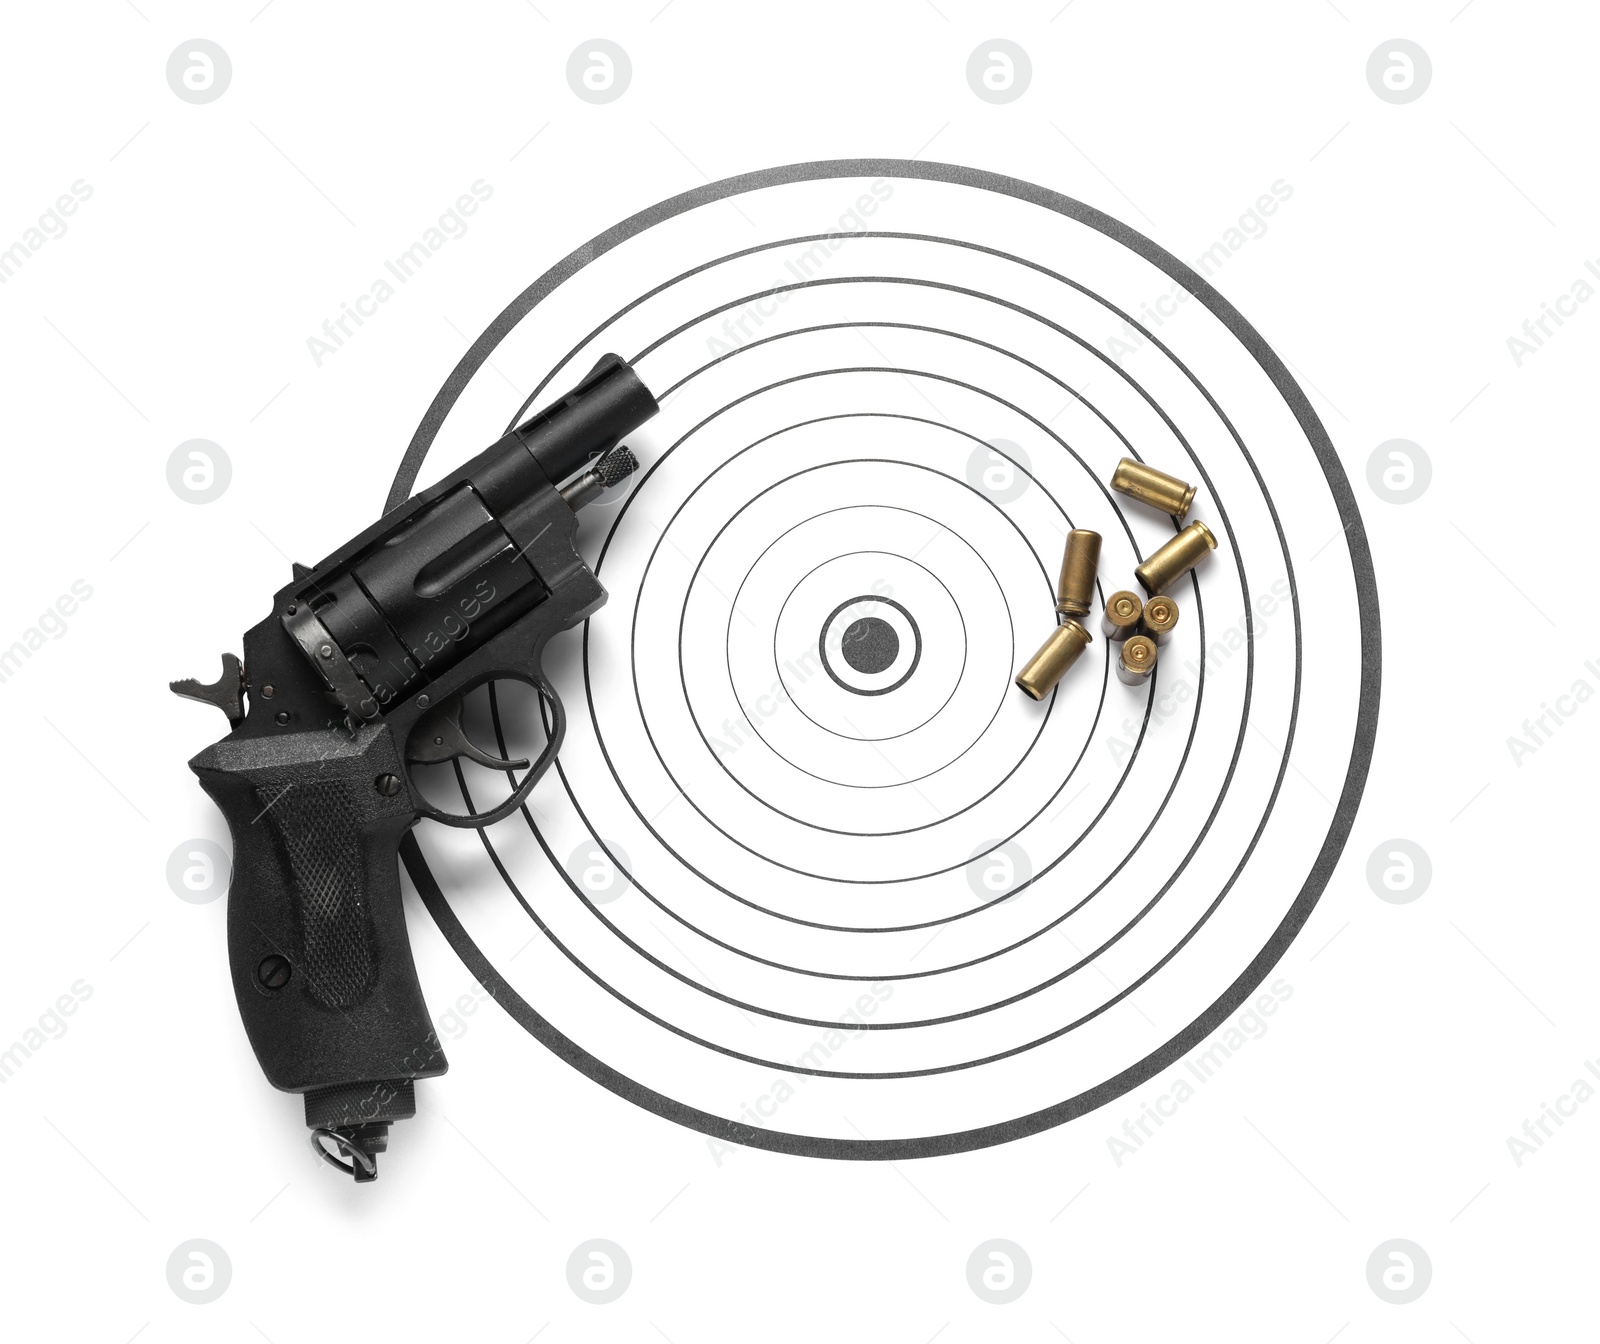 Photo of Shooting target, handgun and bullets isolated on white, top view